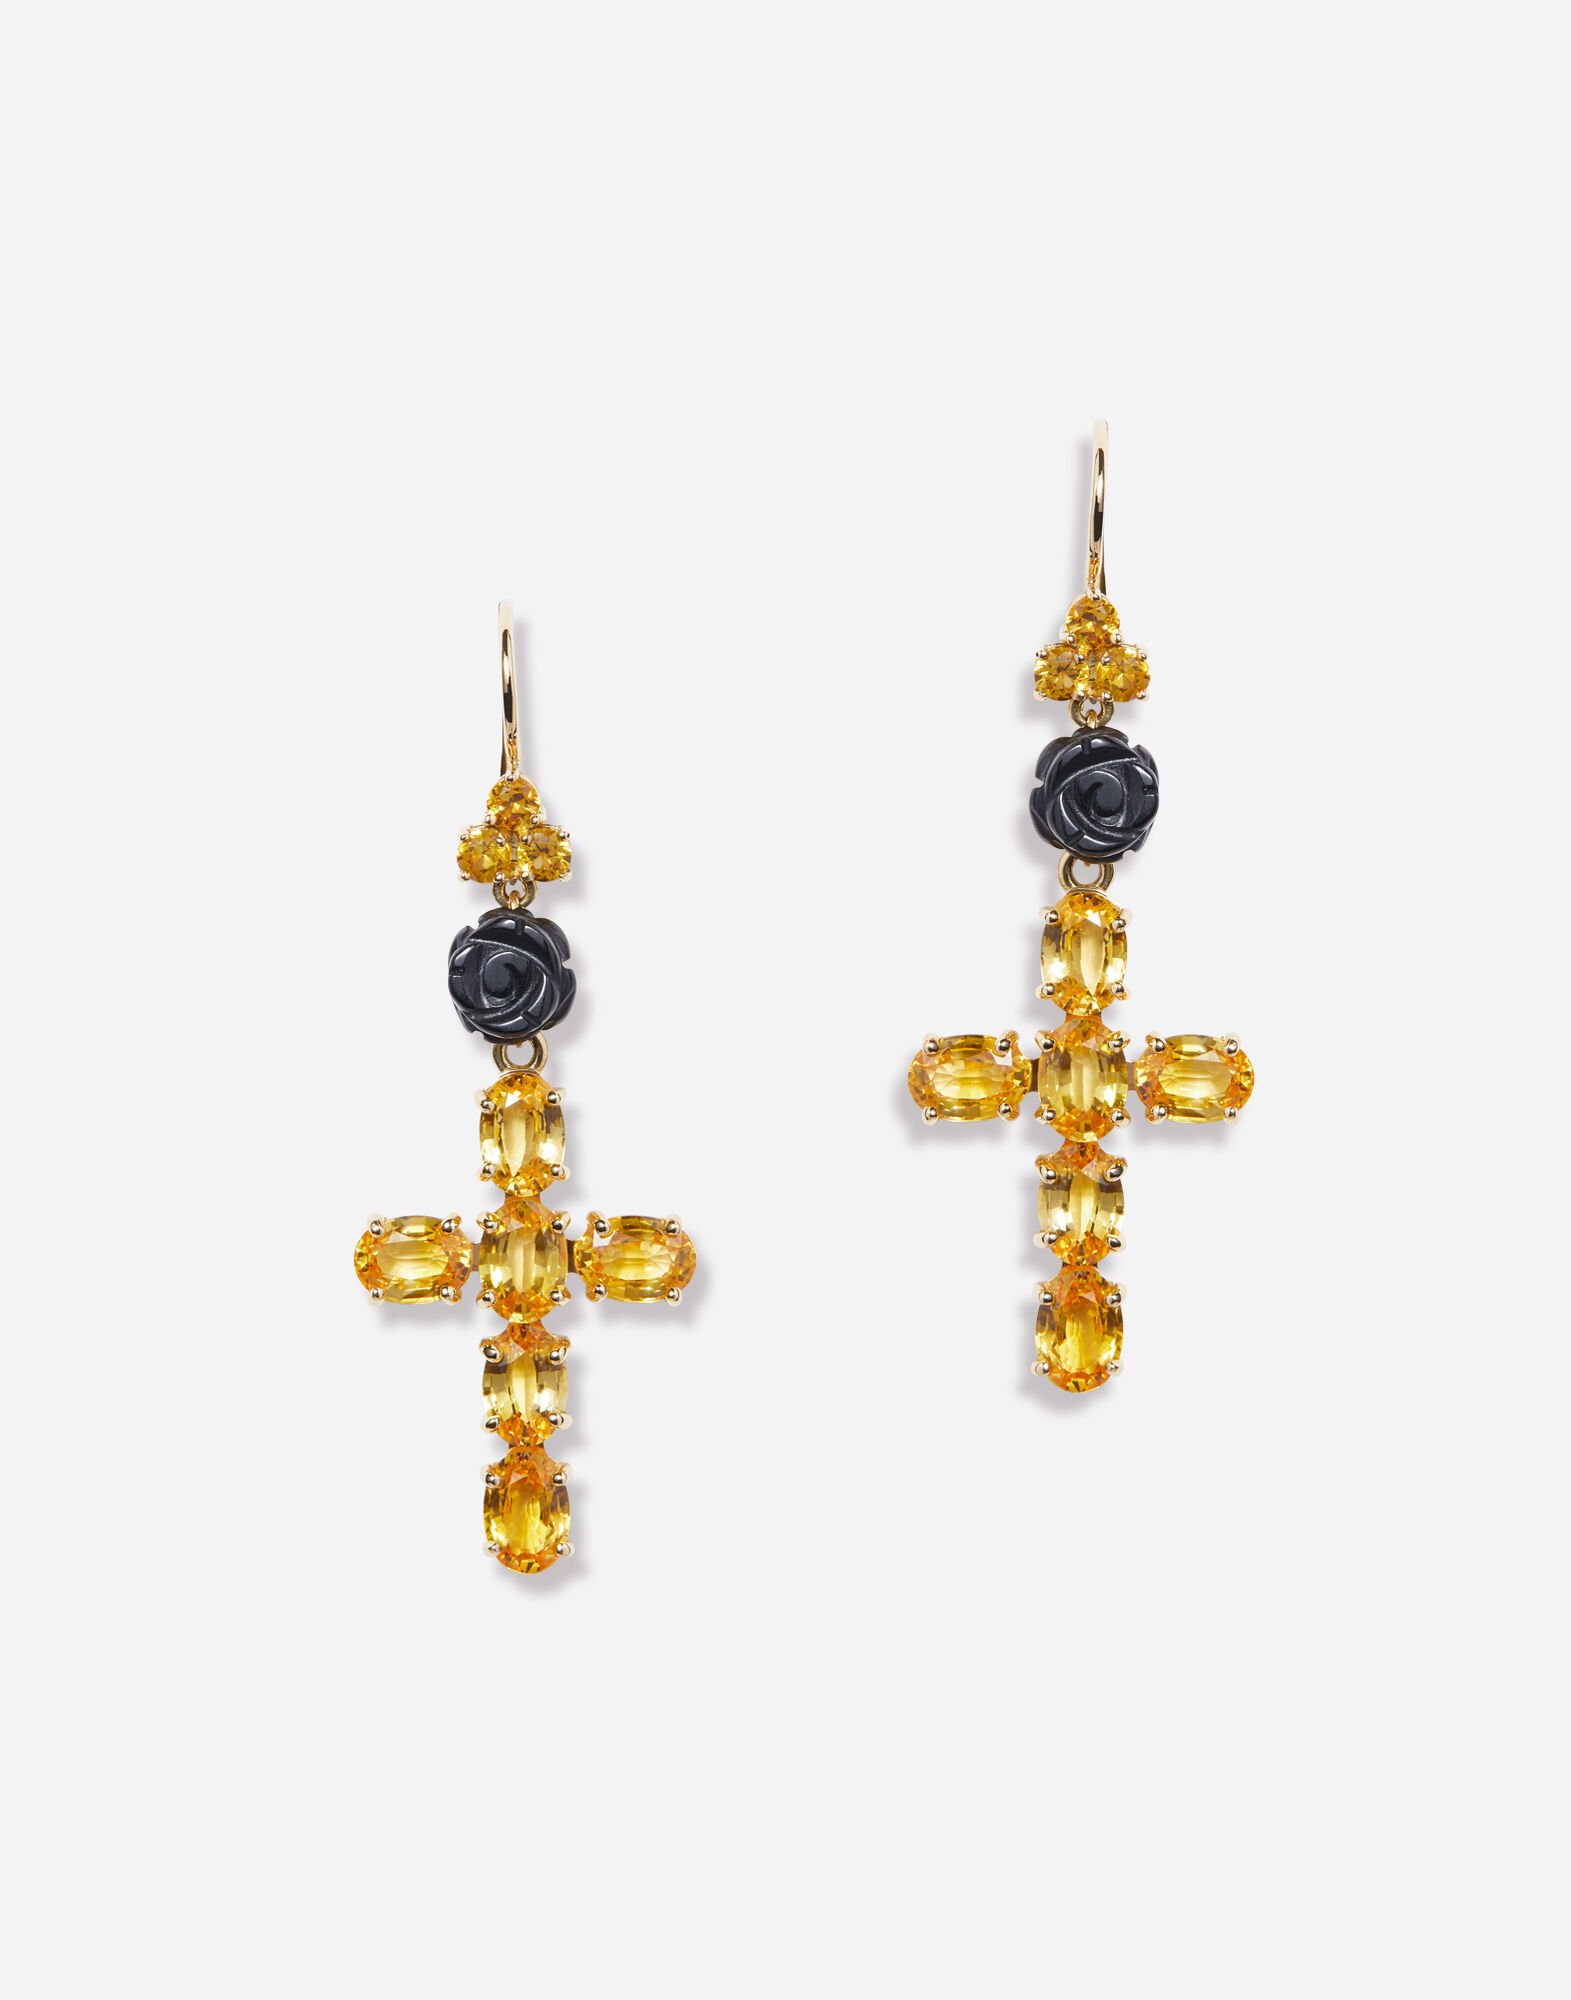 Dolce & Gabbana Family yellow gold earrings with yellow sapphires Gold WFHK2GWSAPB